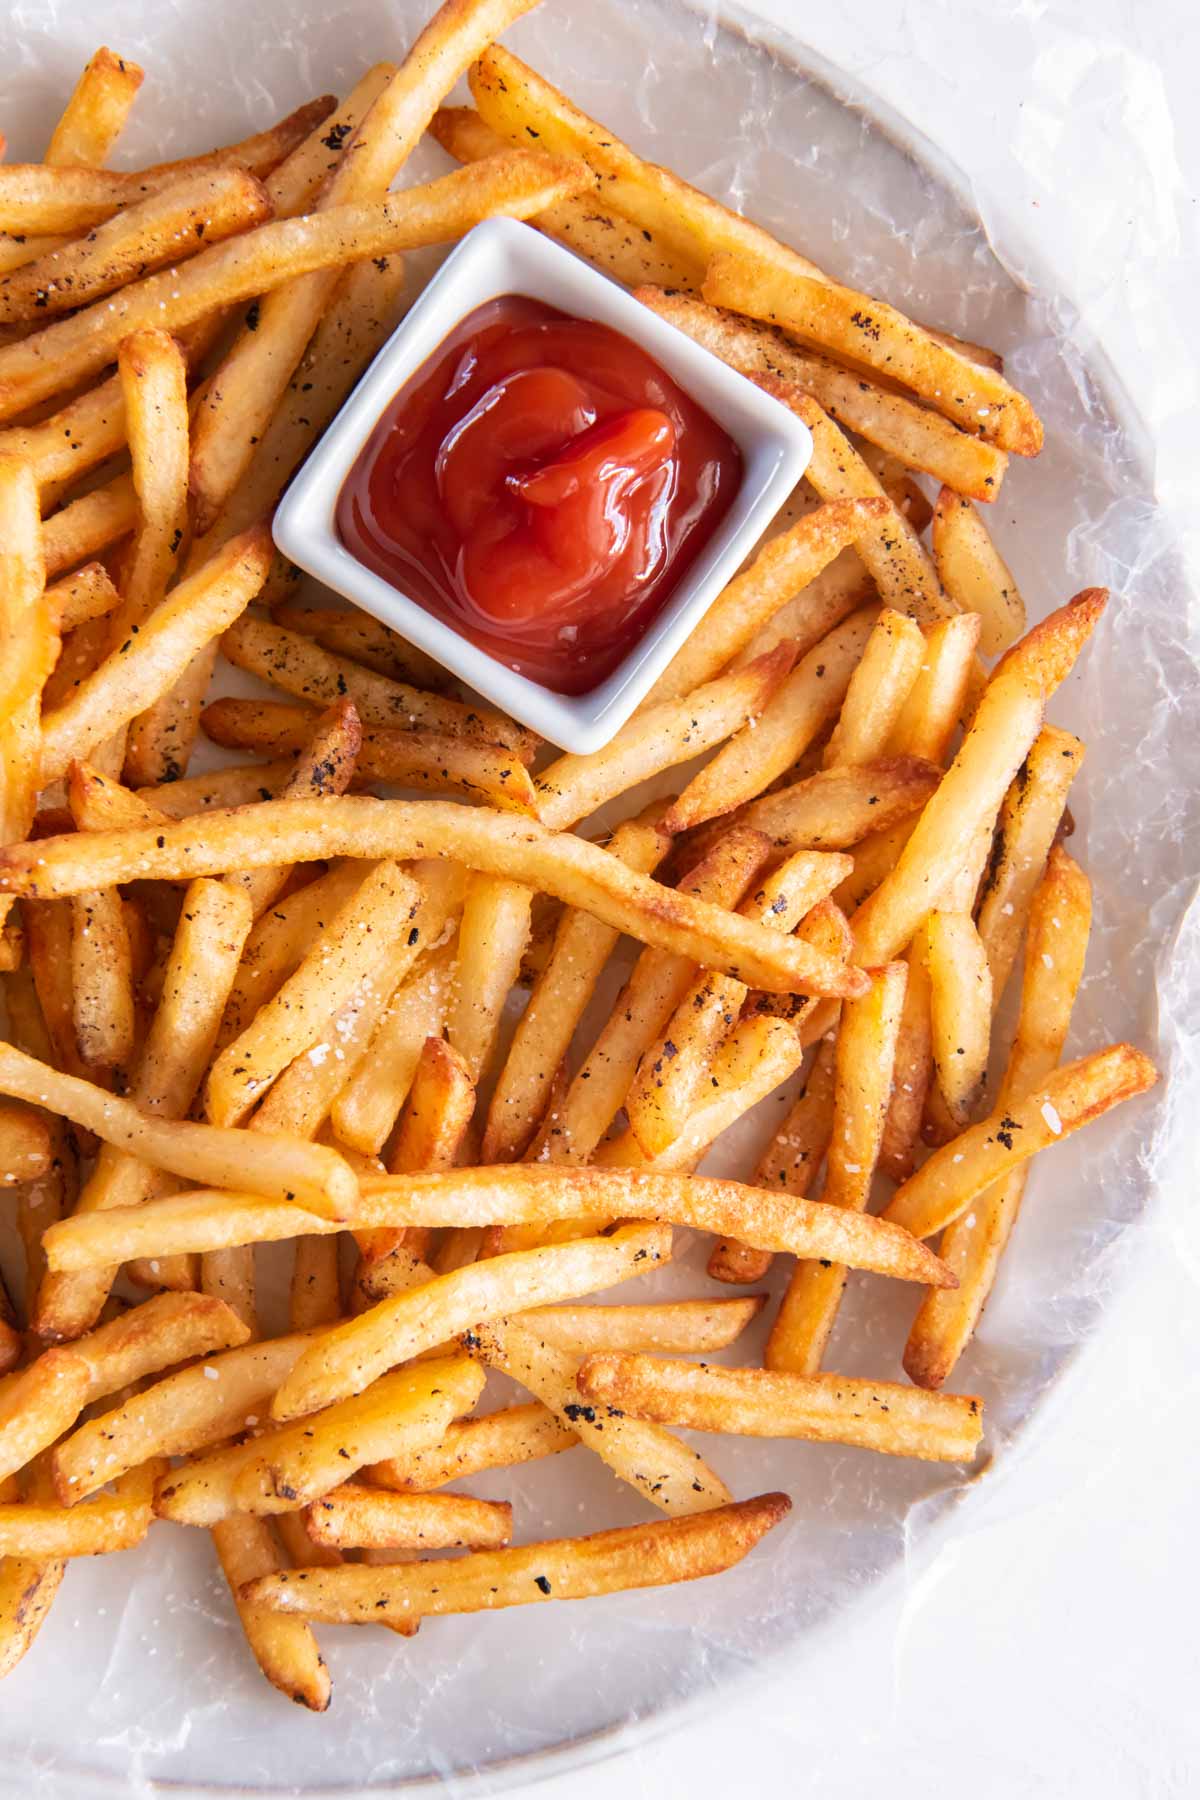 French fries served with small dish of ketchup.